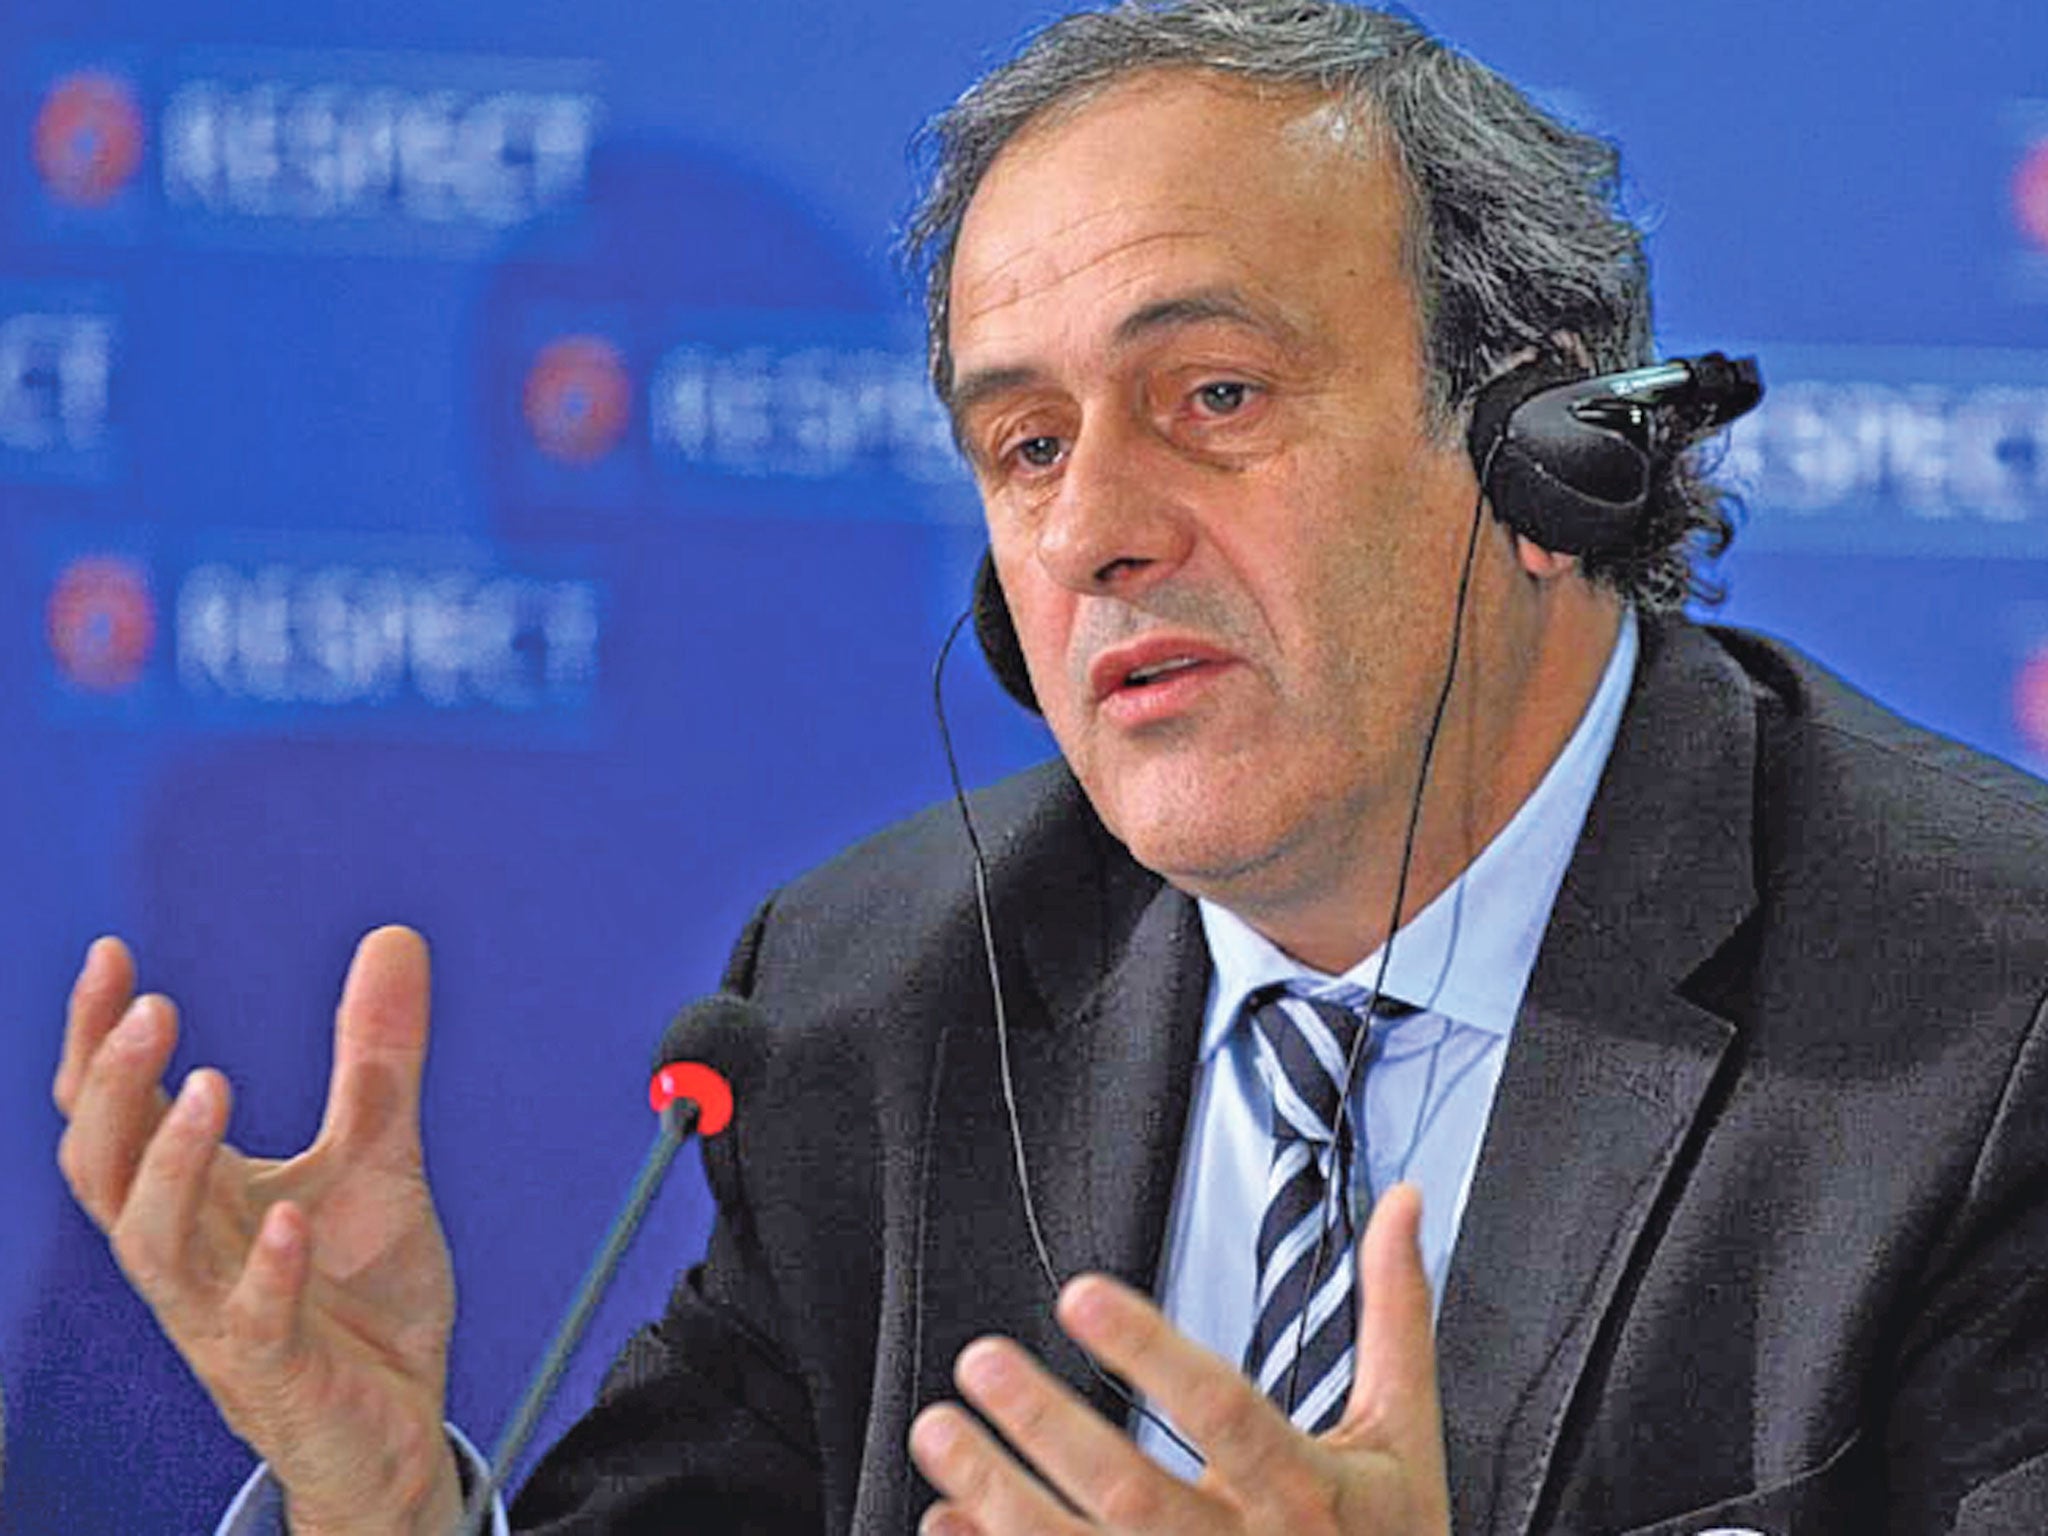 Full ramifications of Michel Platini’s financial play play policy have yet to be felt